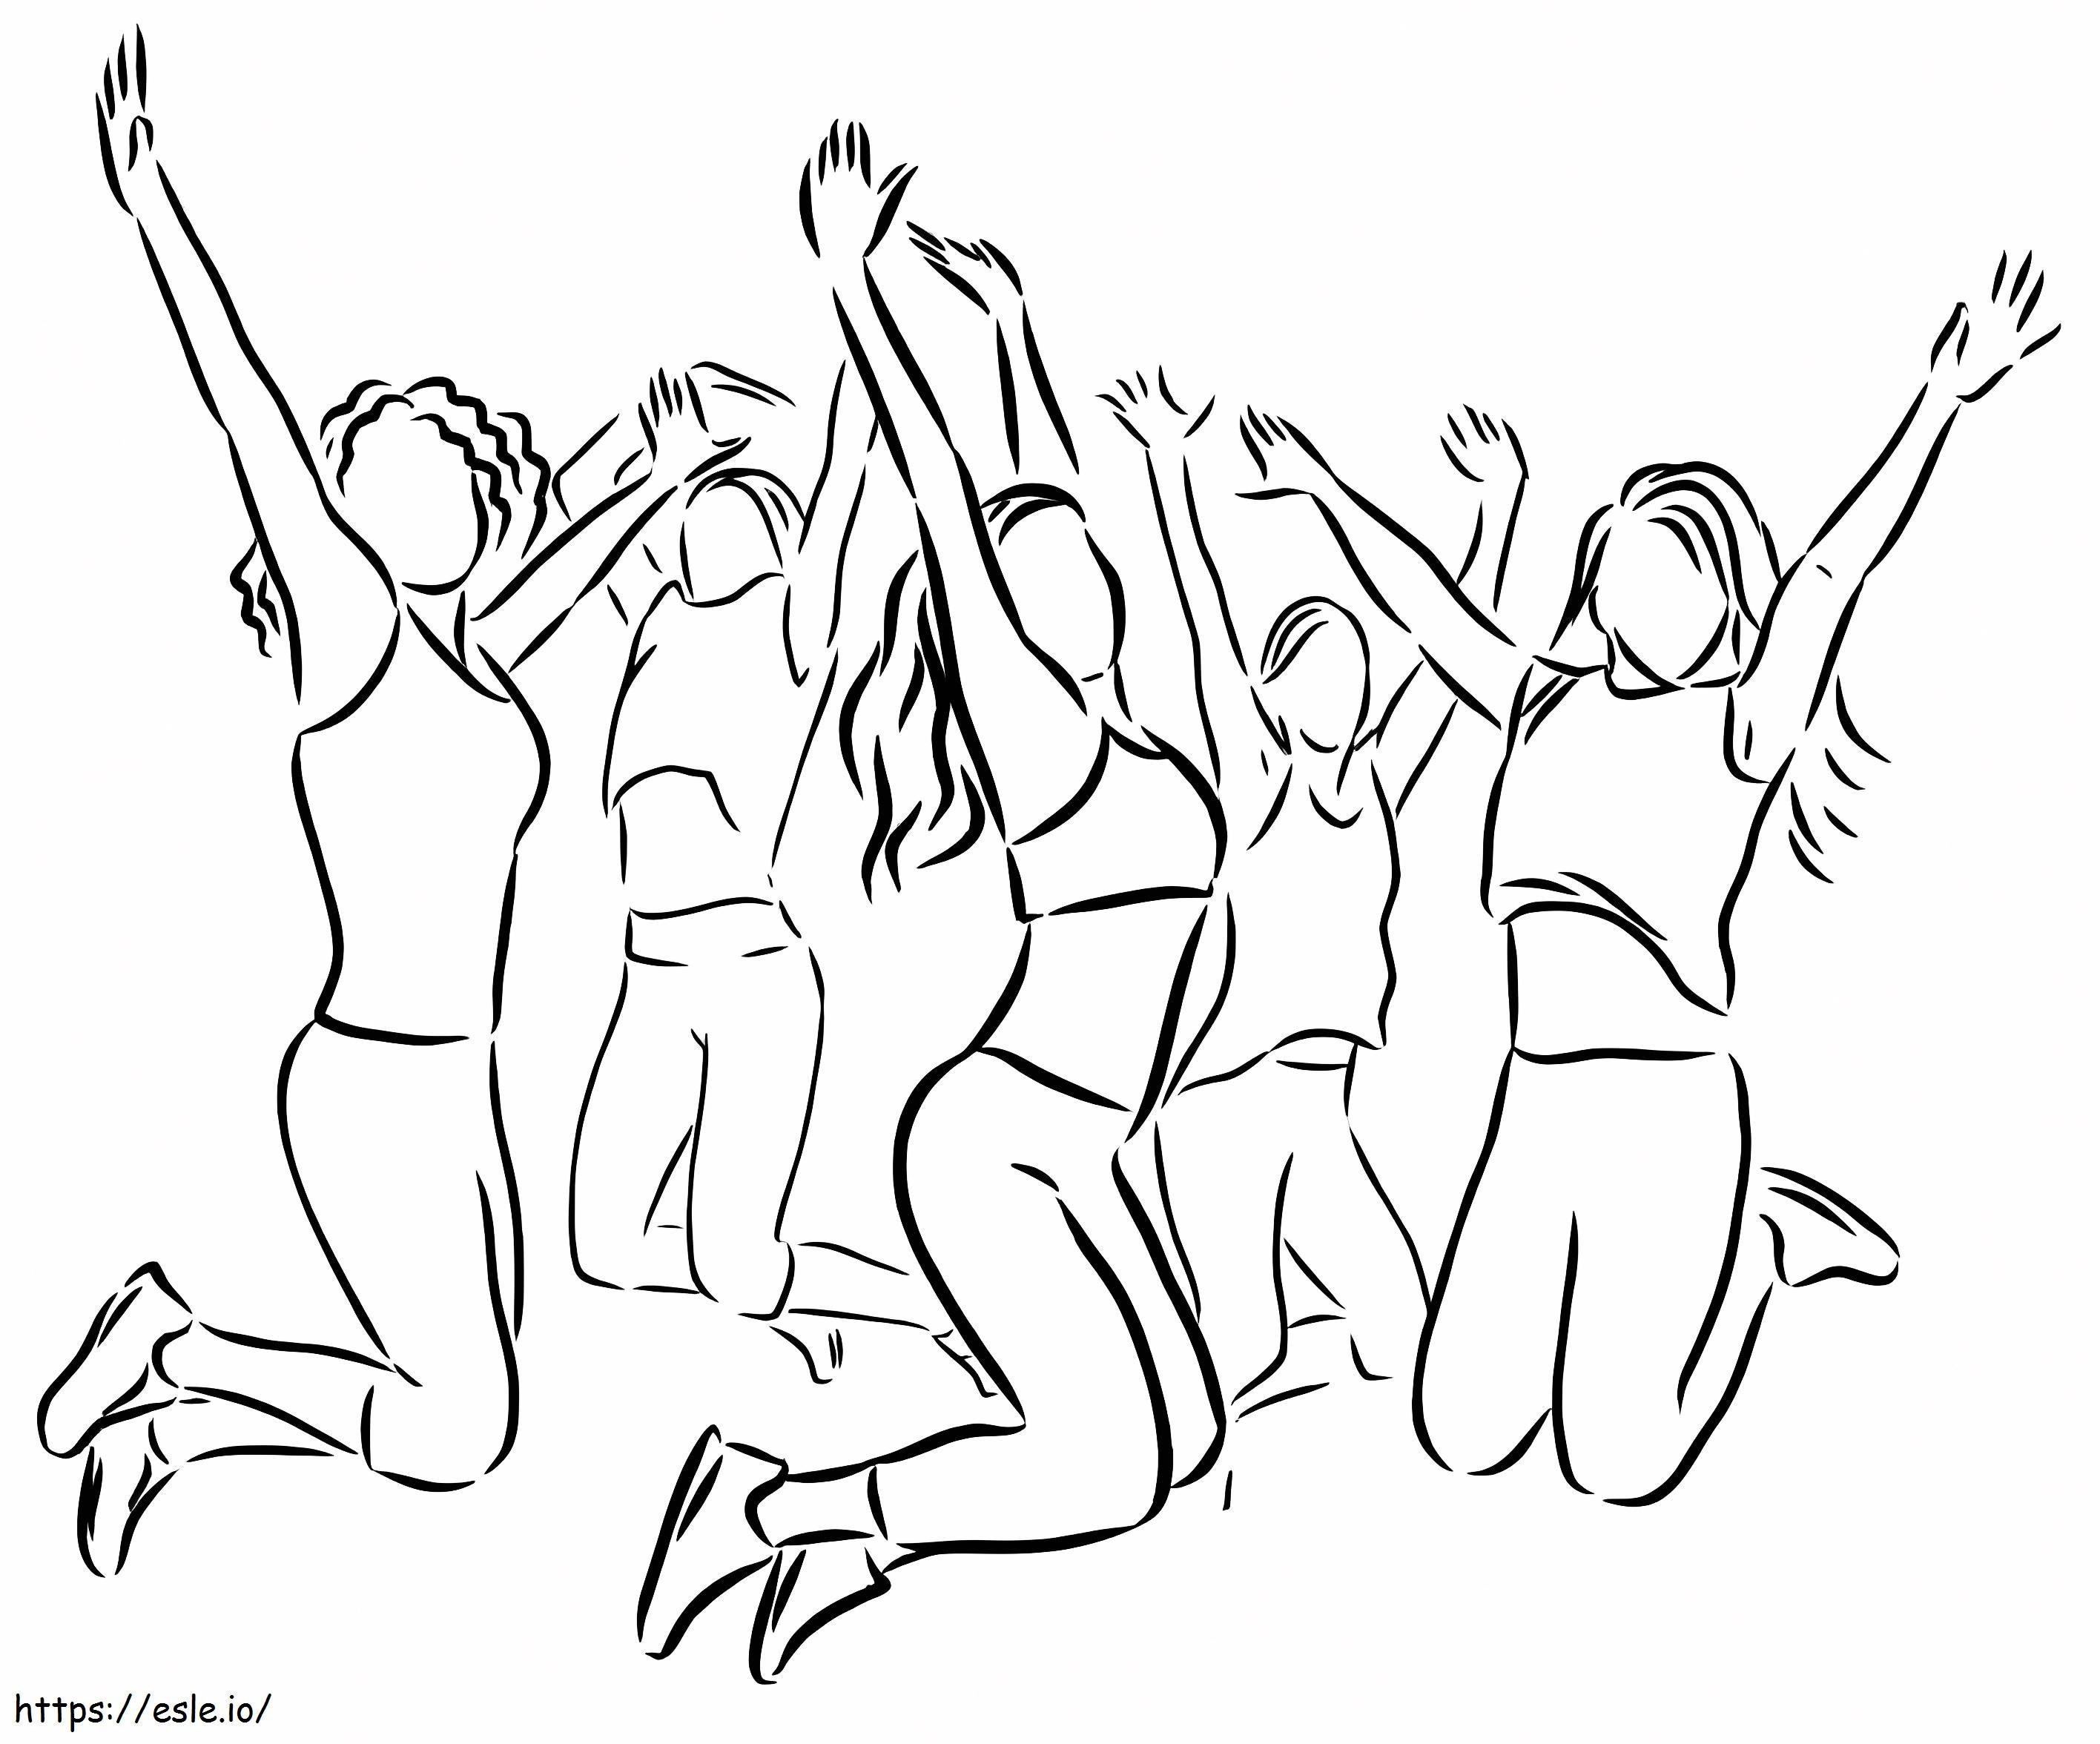 Free Zumba Dancing coloring page